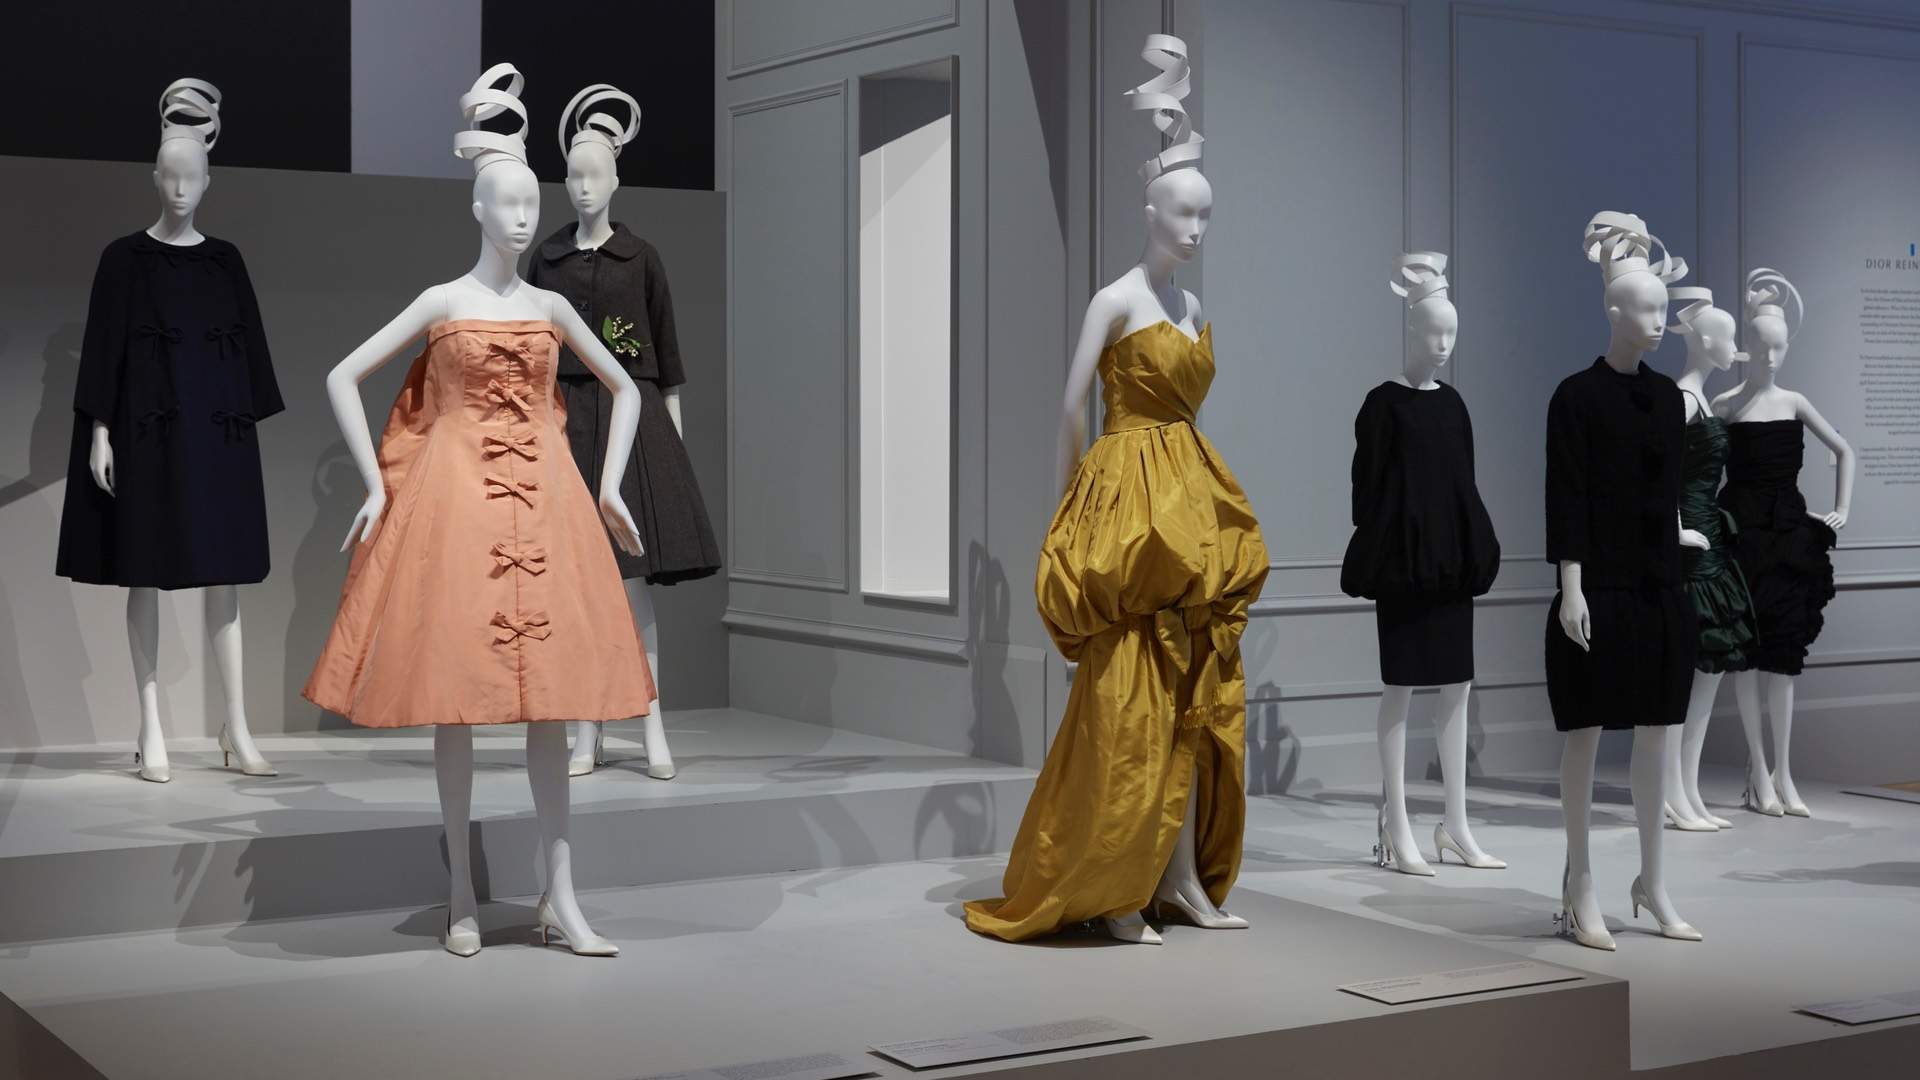 A Look Inside the Australia's Huge World Premiere Dior Exhibition